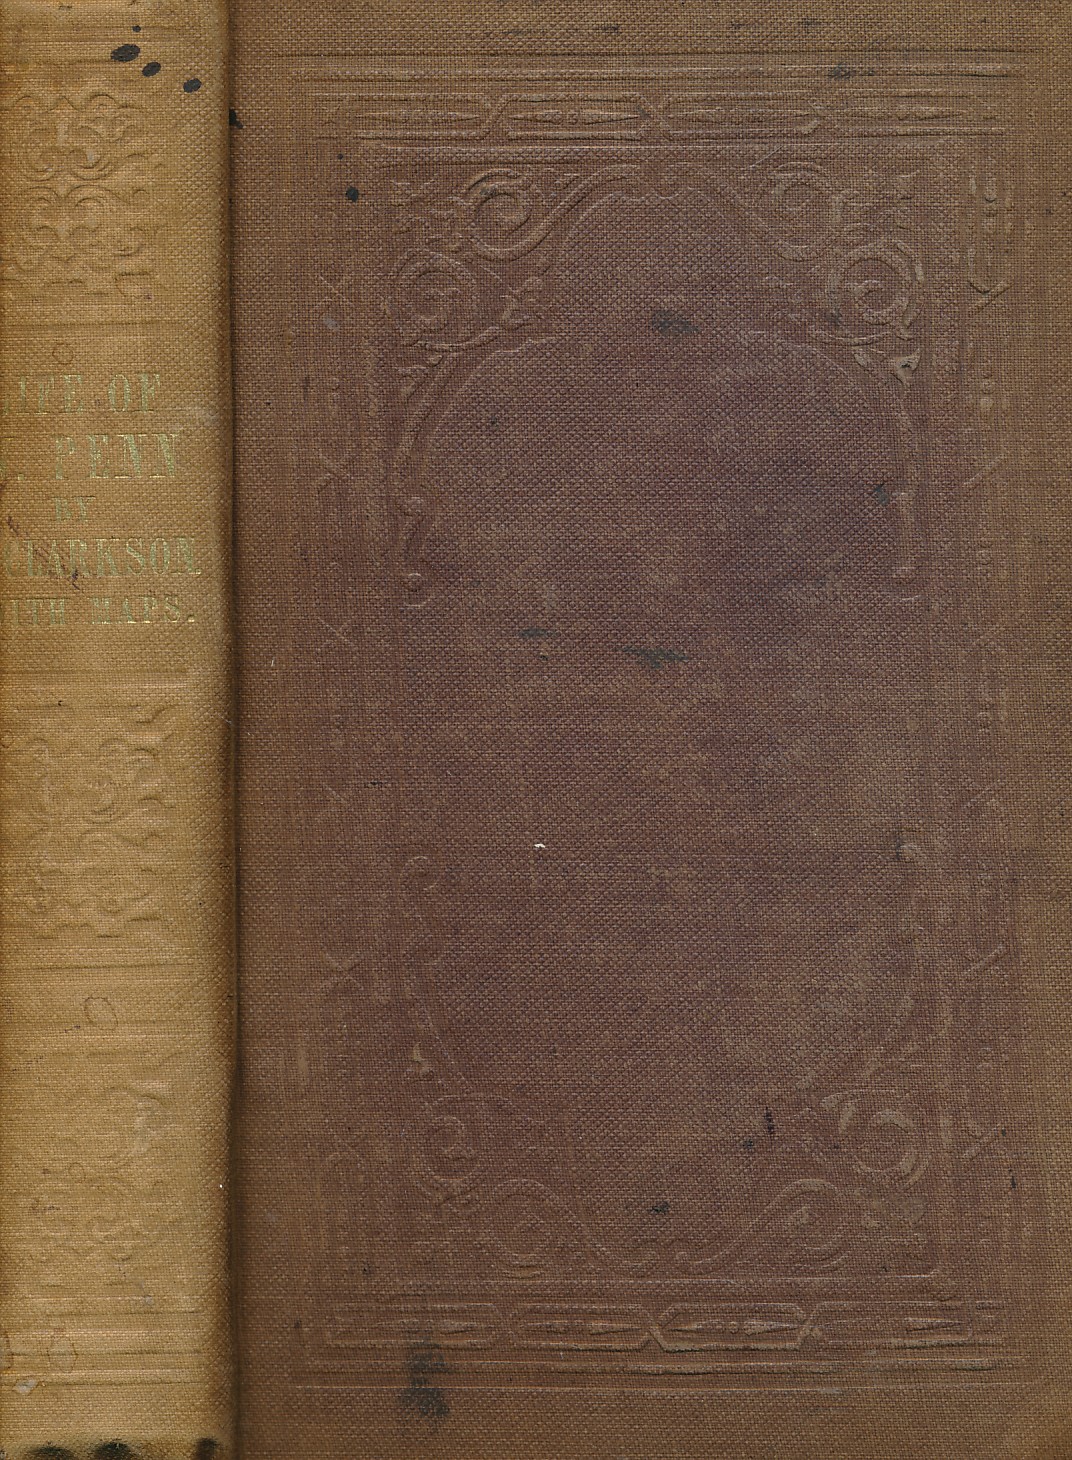 Memoirs of the Public and Private Life of William Penn